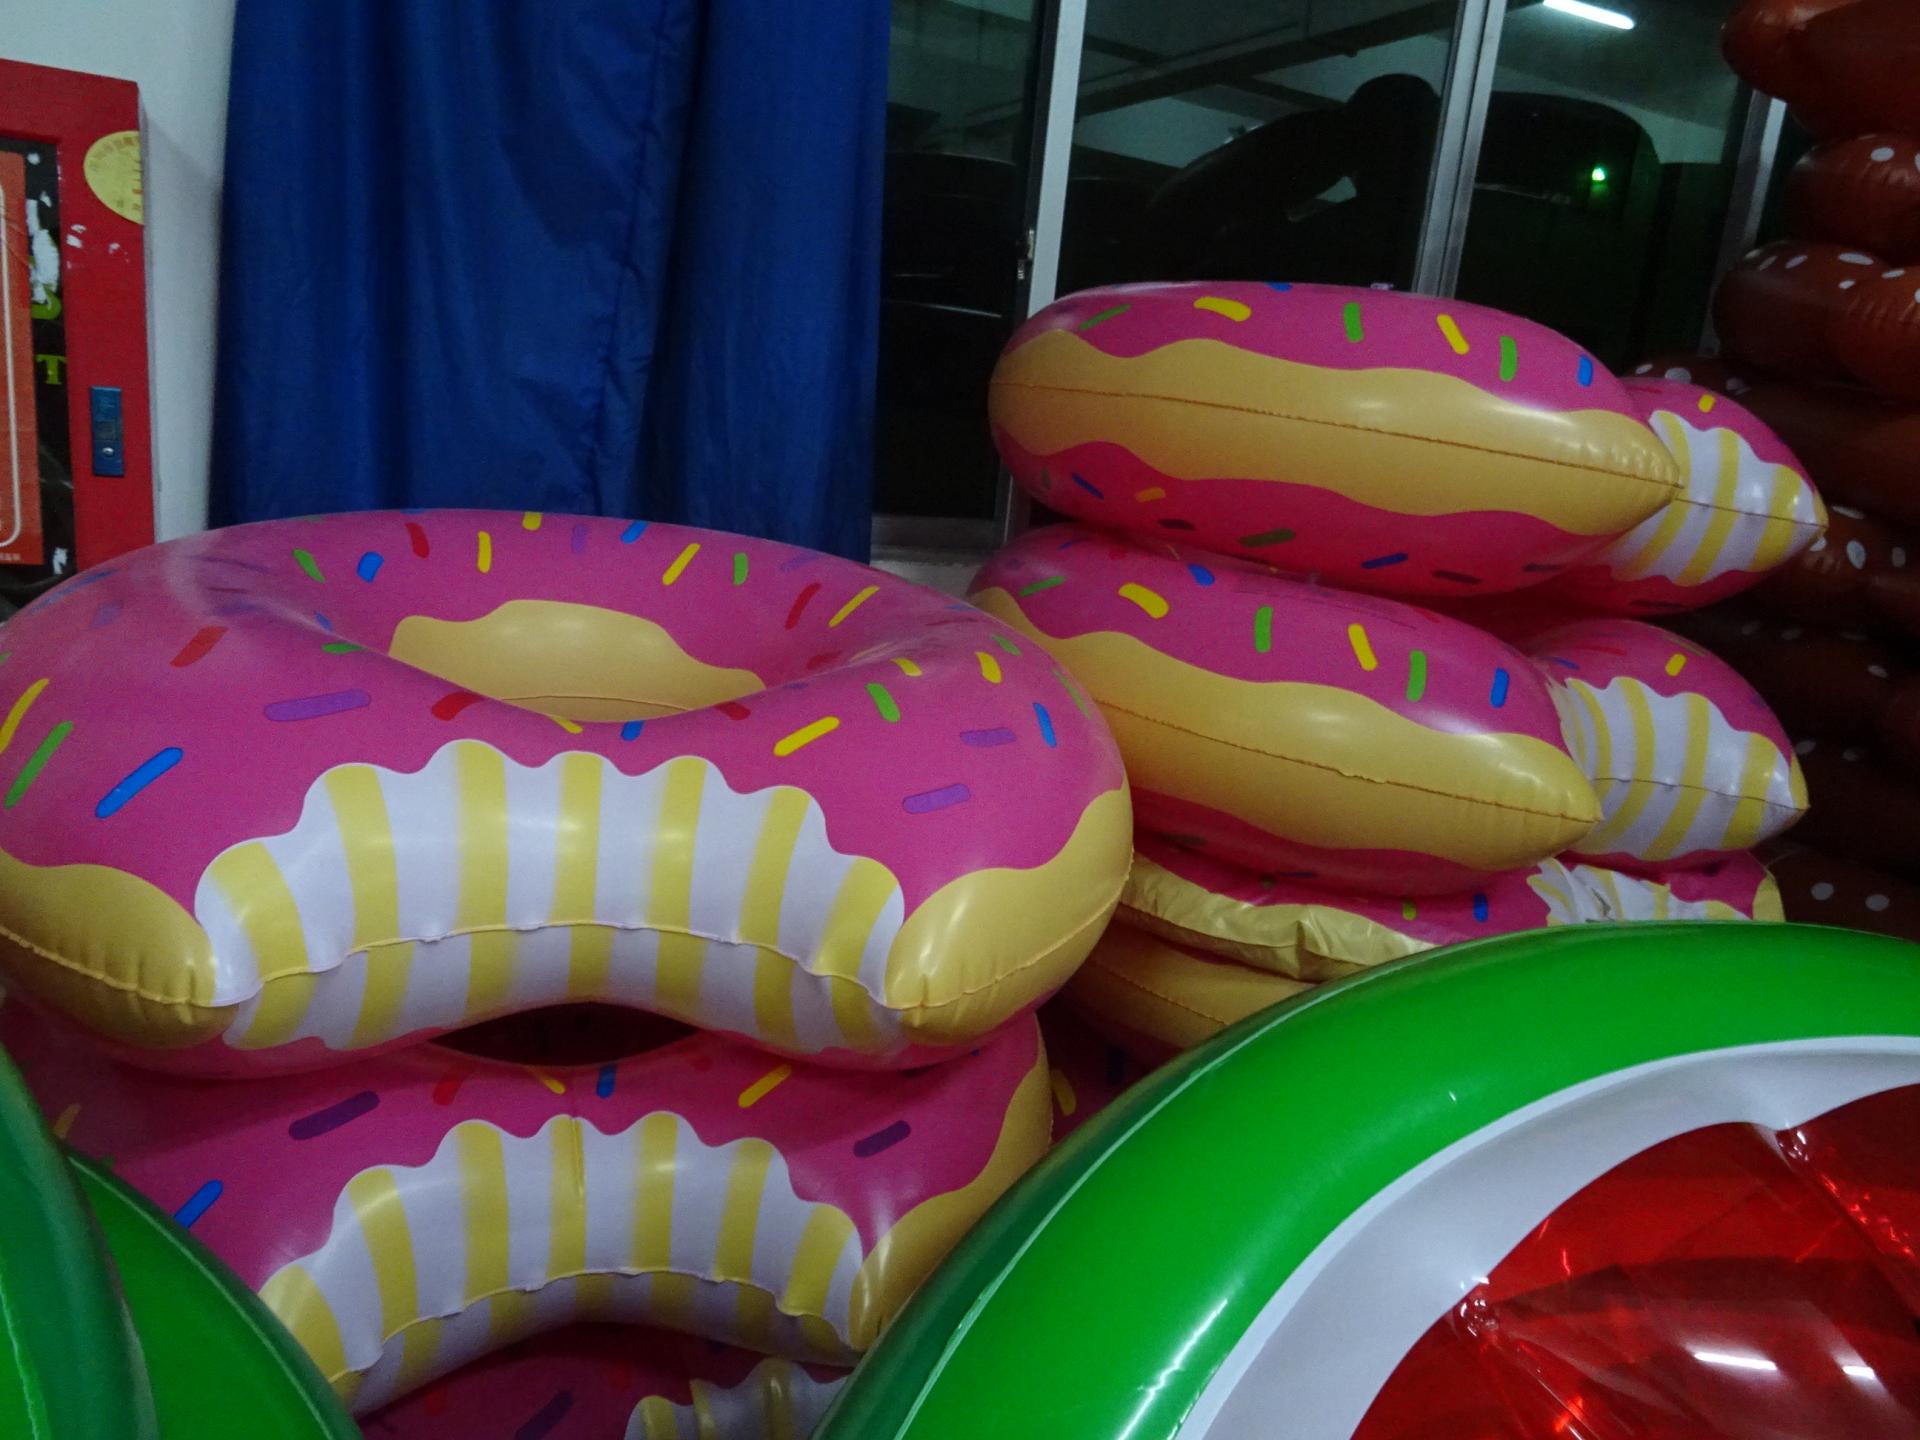 Customised Inflatable Swimming Pool Floating Donut Swimming Rings For Indoor And Outdoor